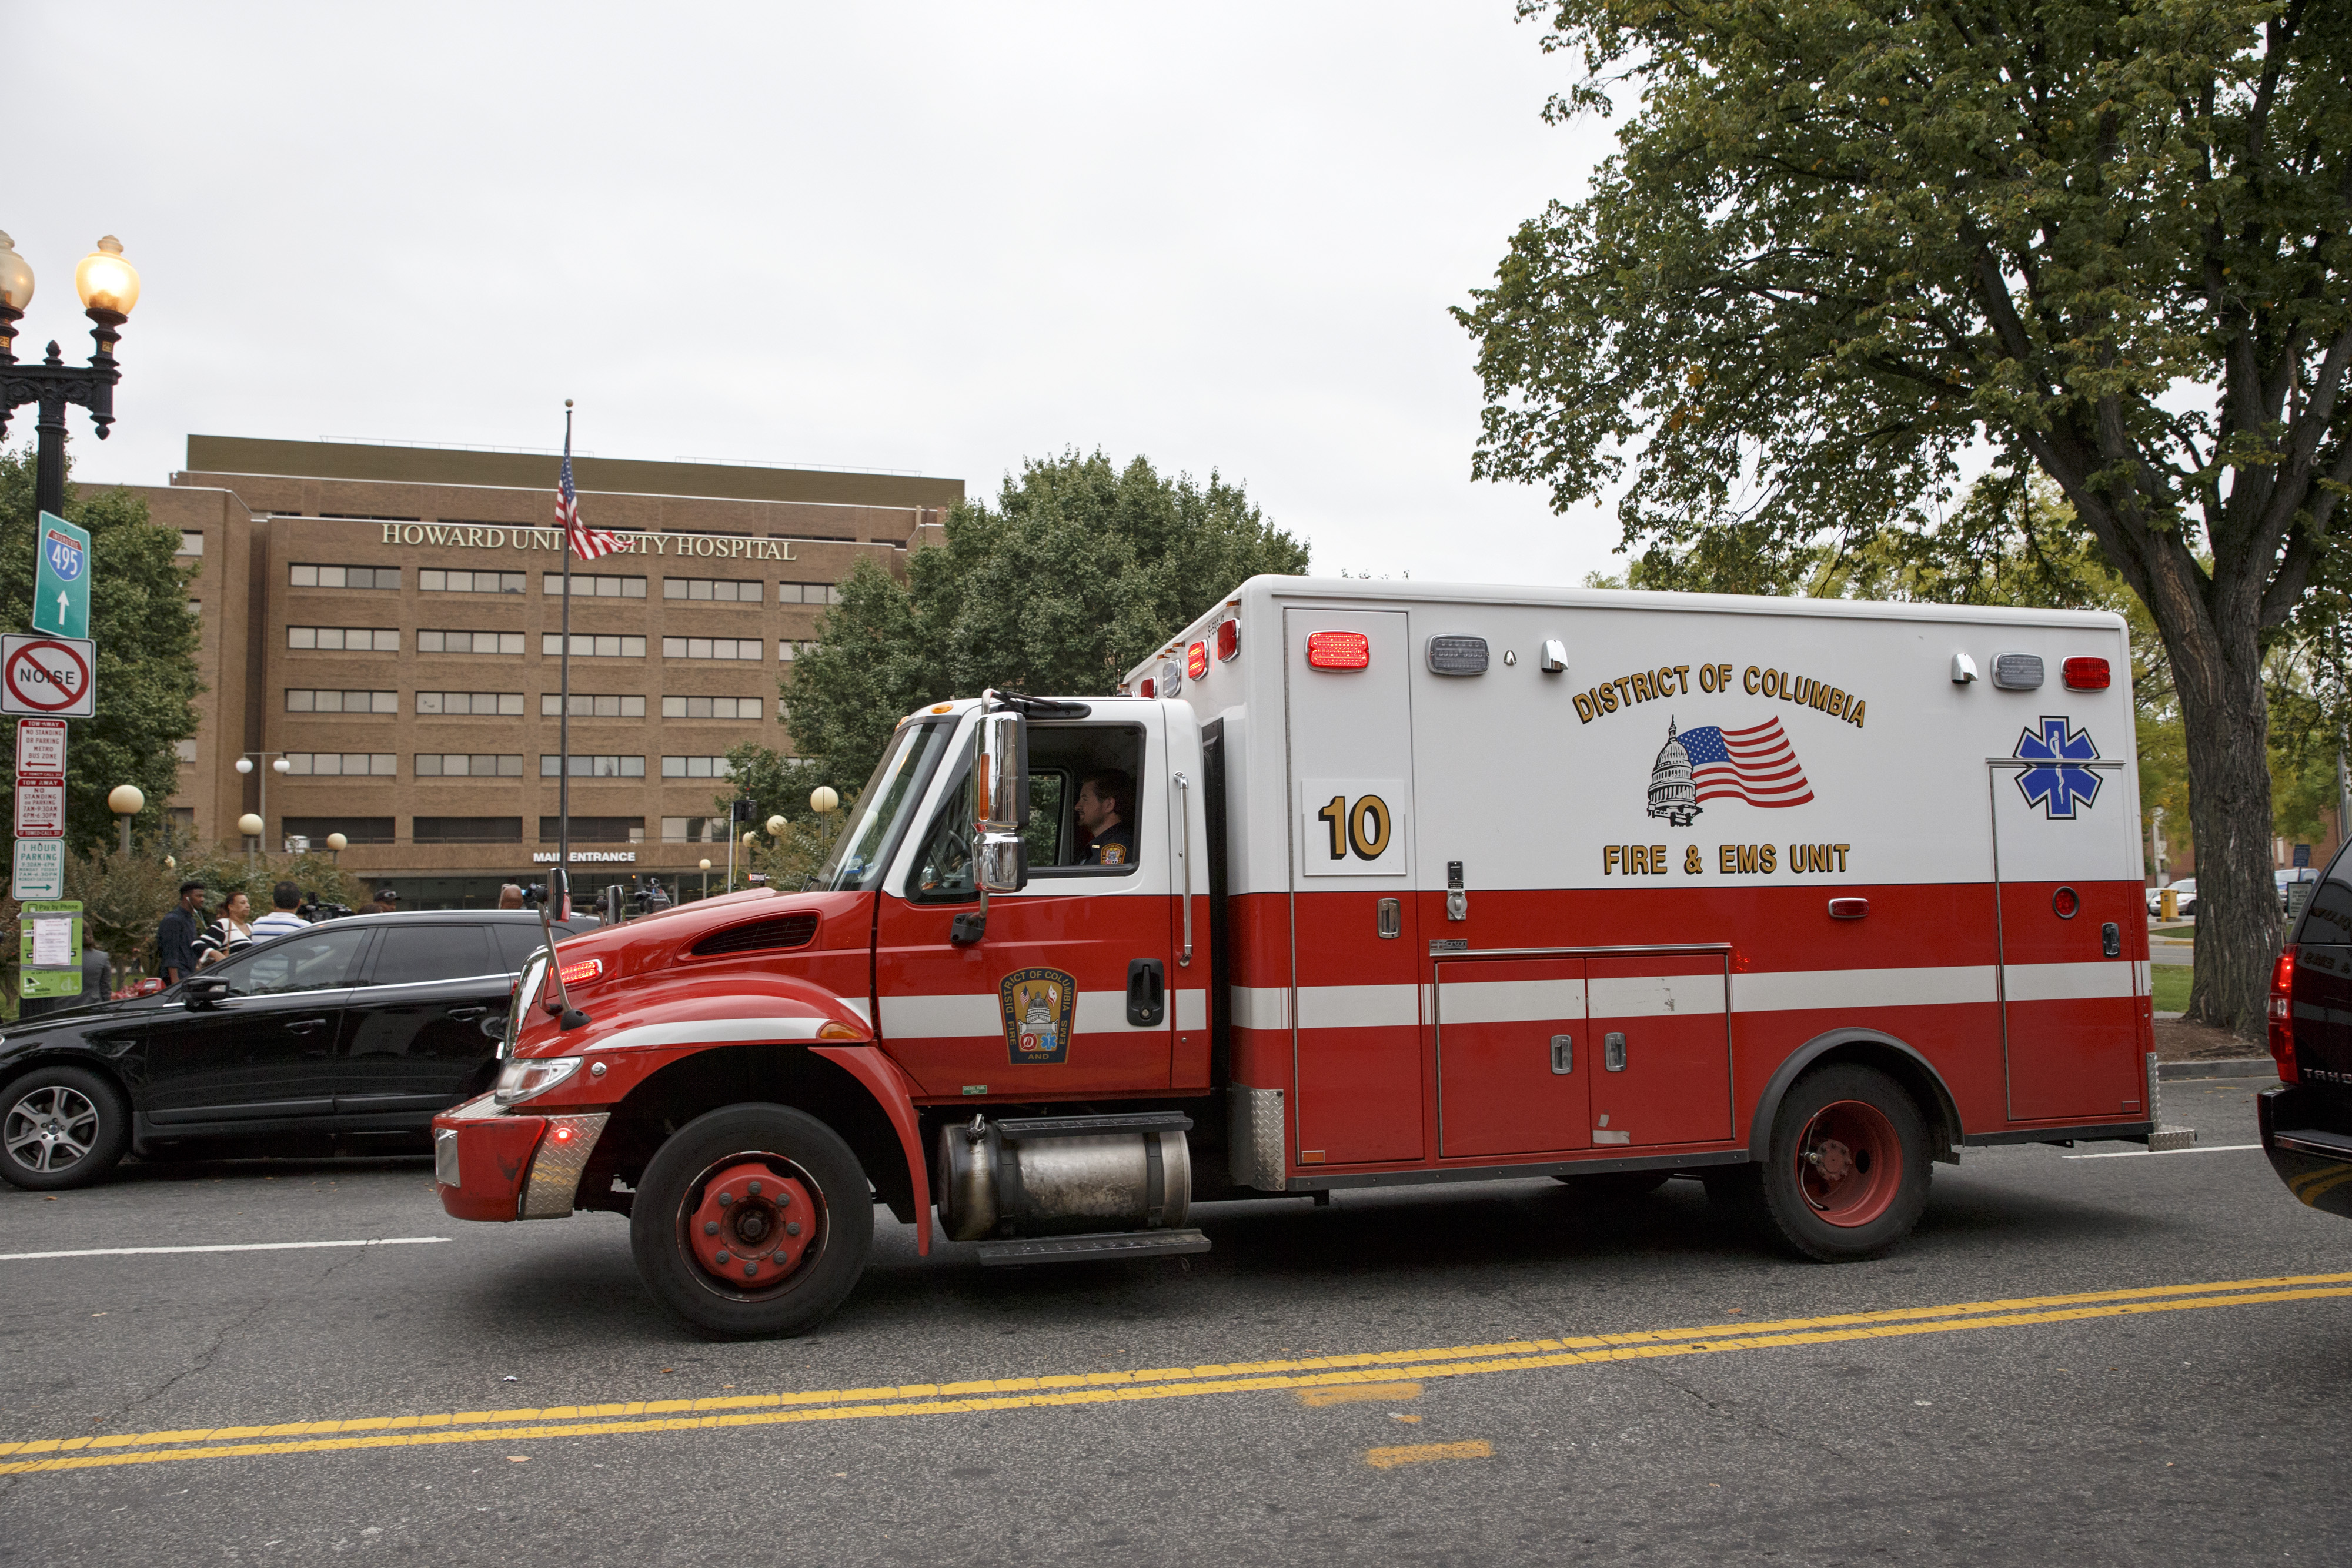 D.C. ambulance fleet lags behind goal of 49 in service